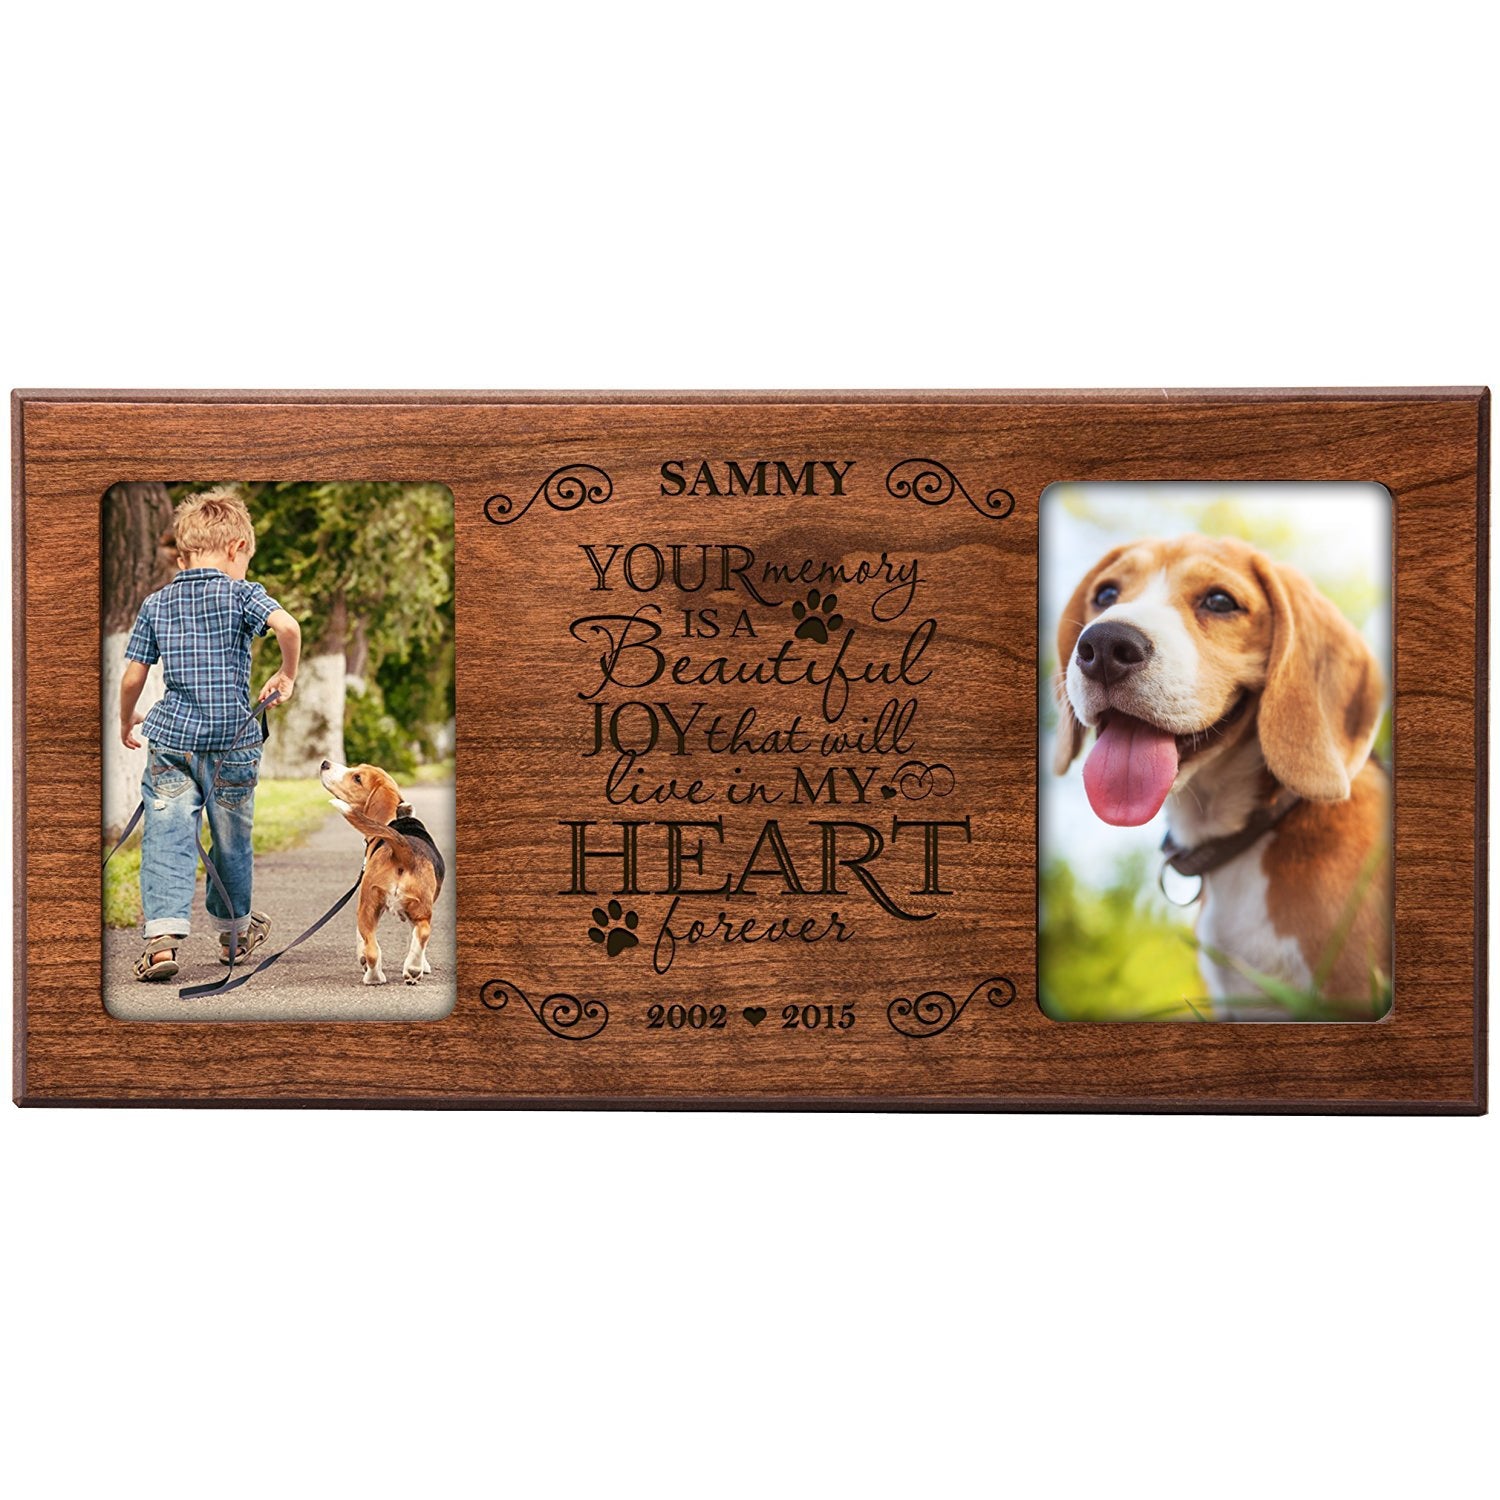 Pet Memorial Double Picture Frame - Your Memory Is A Beautiful Joy